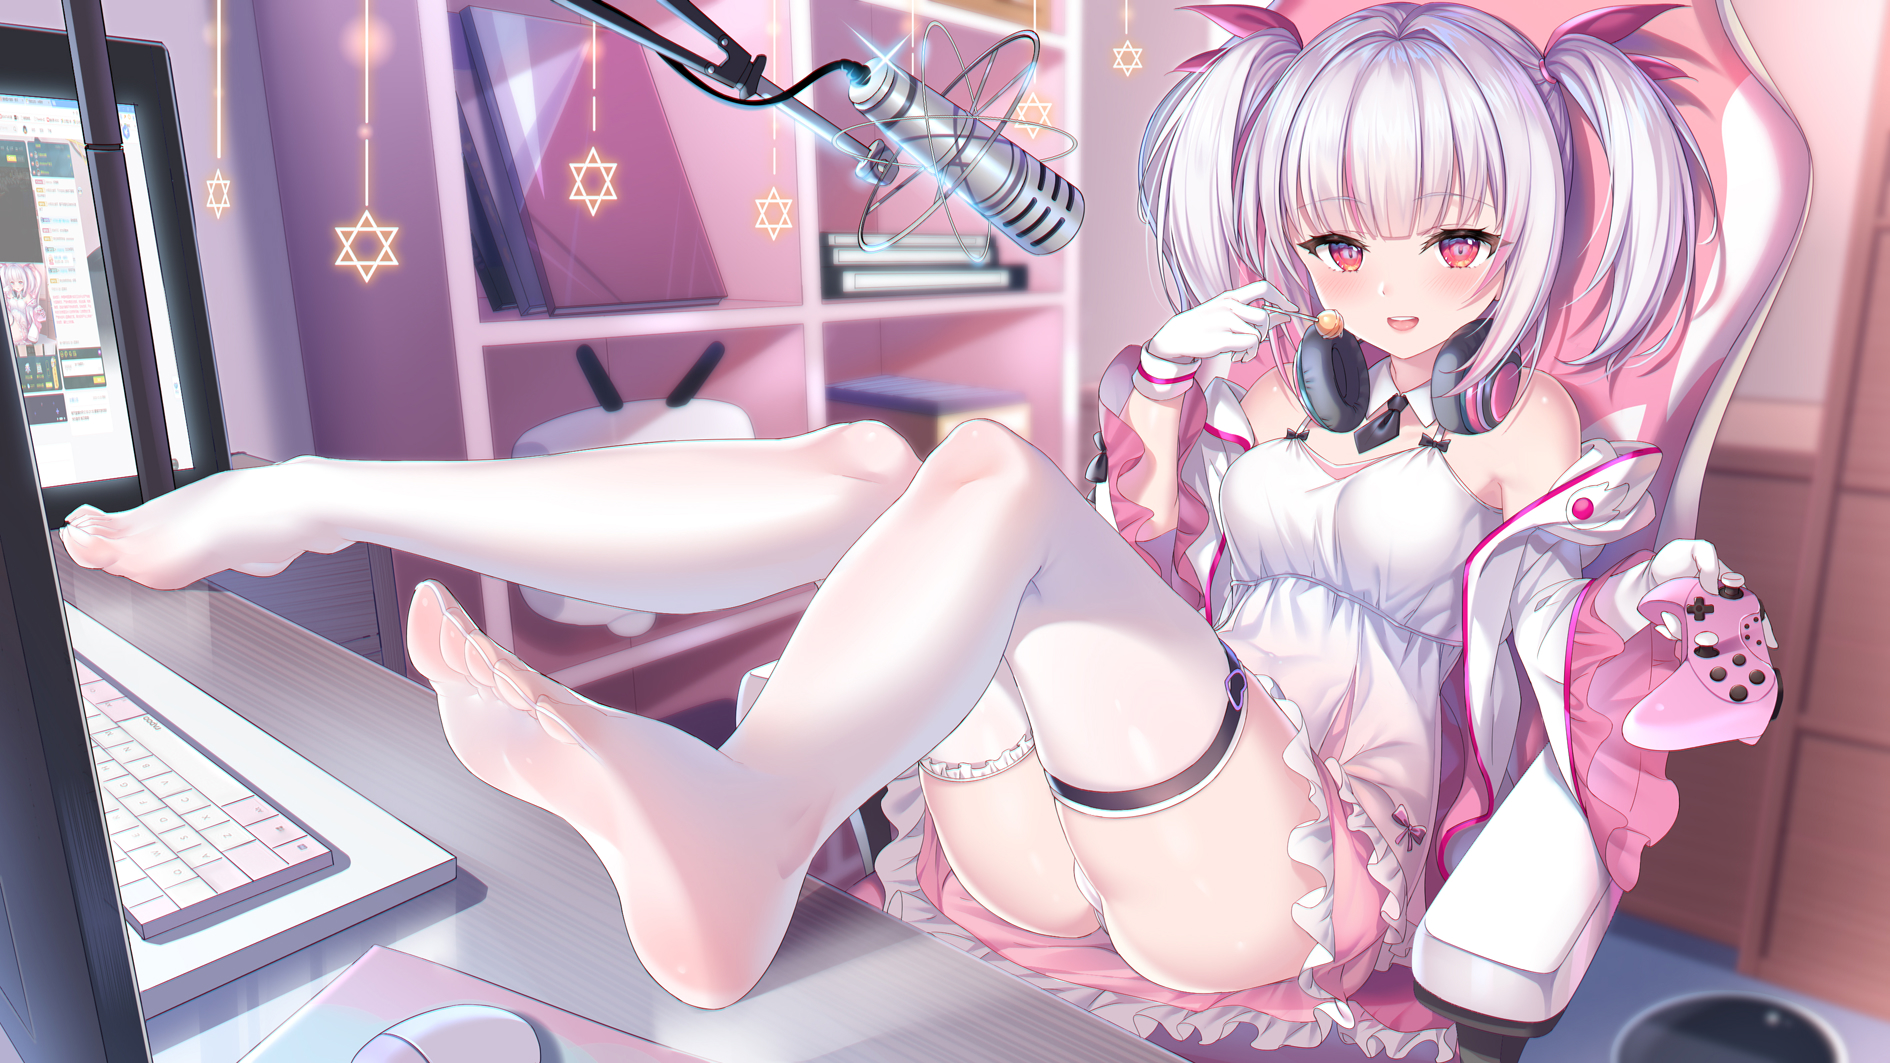 Anime 1890x1063 anime girls thigh-highs lifting skirt toes Streaming controllers lollipop twintails feet foot fetishism